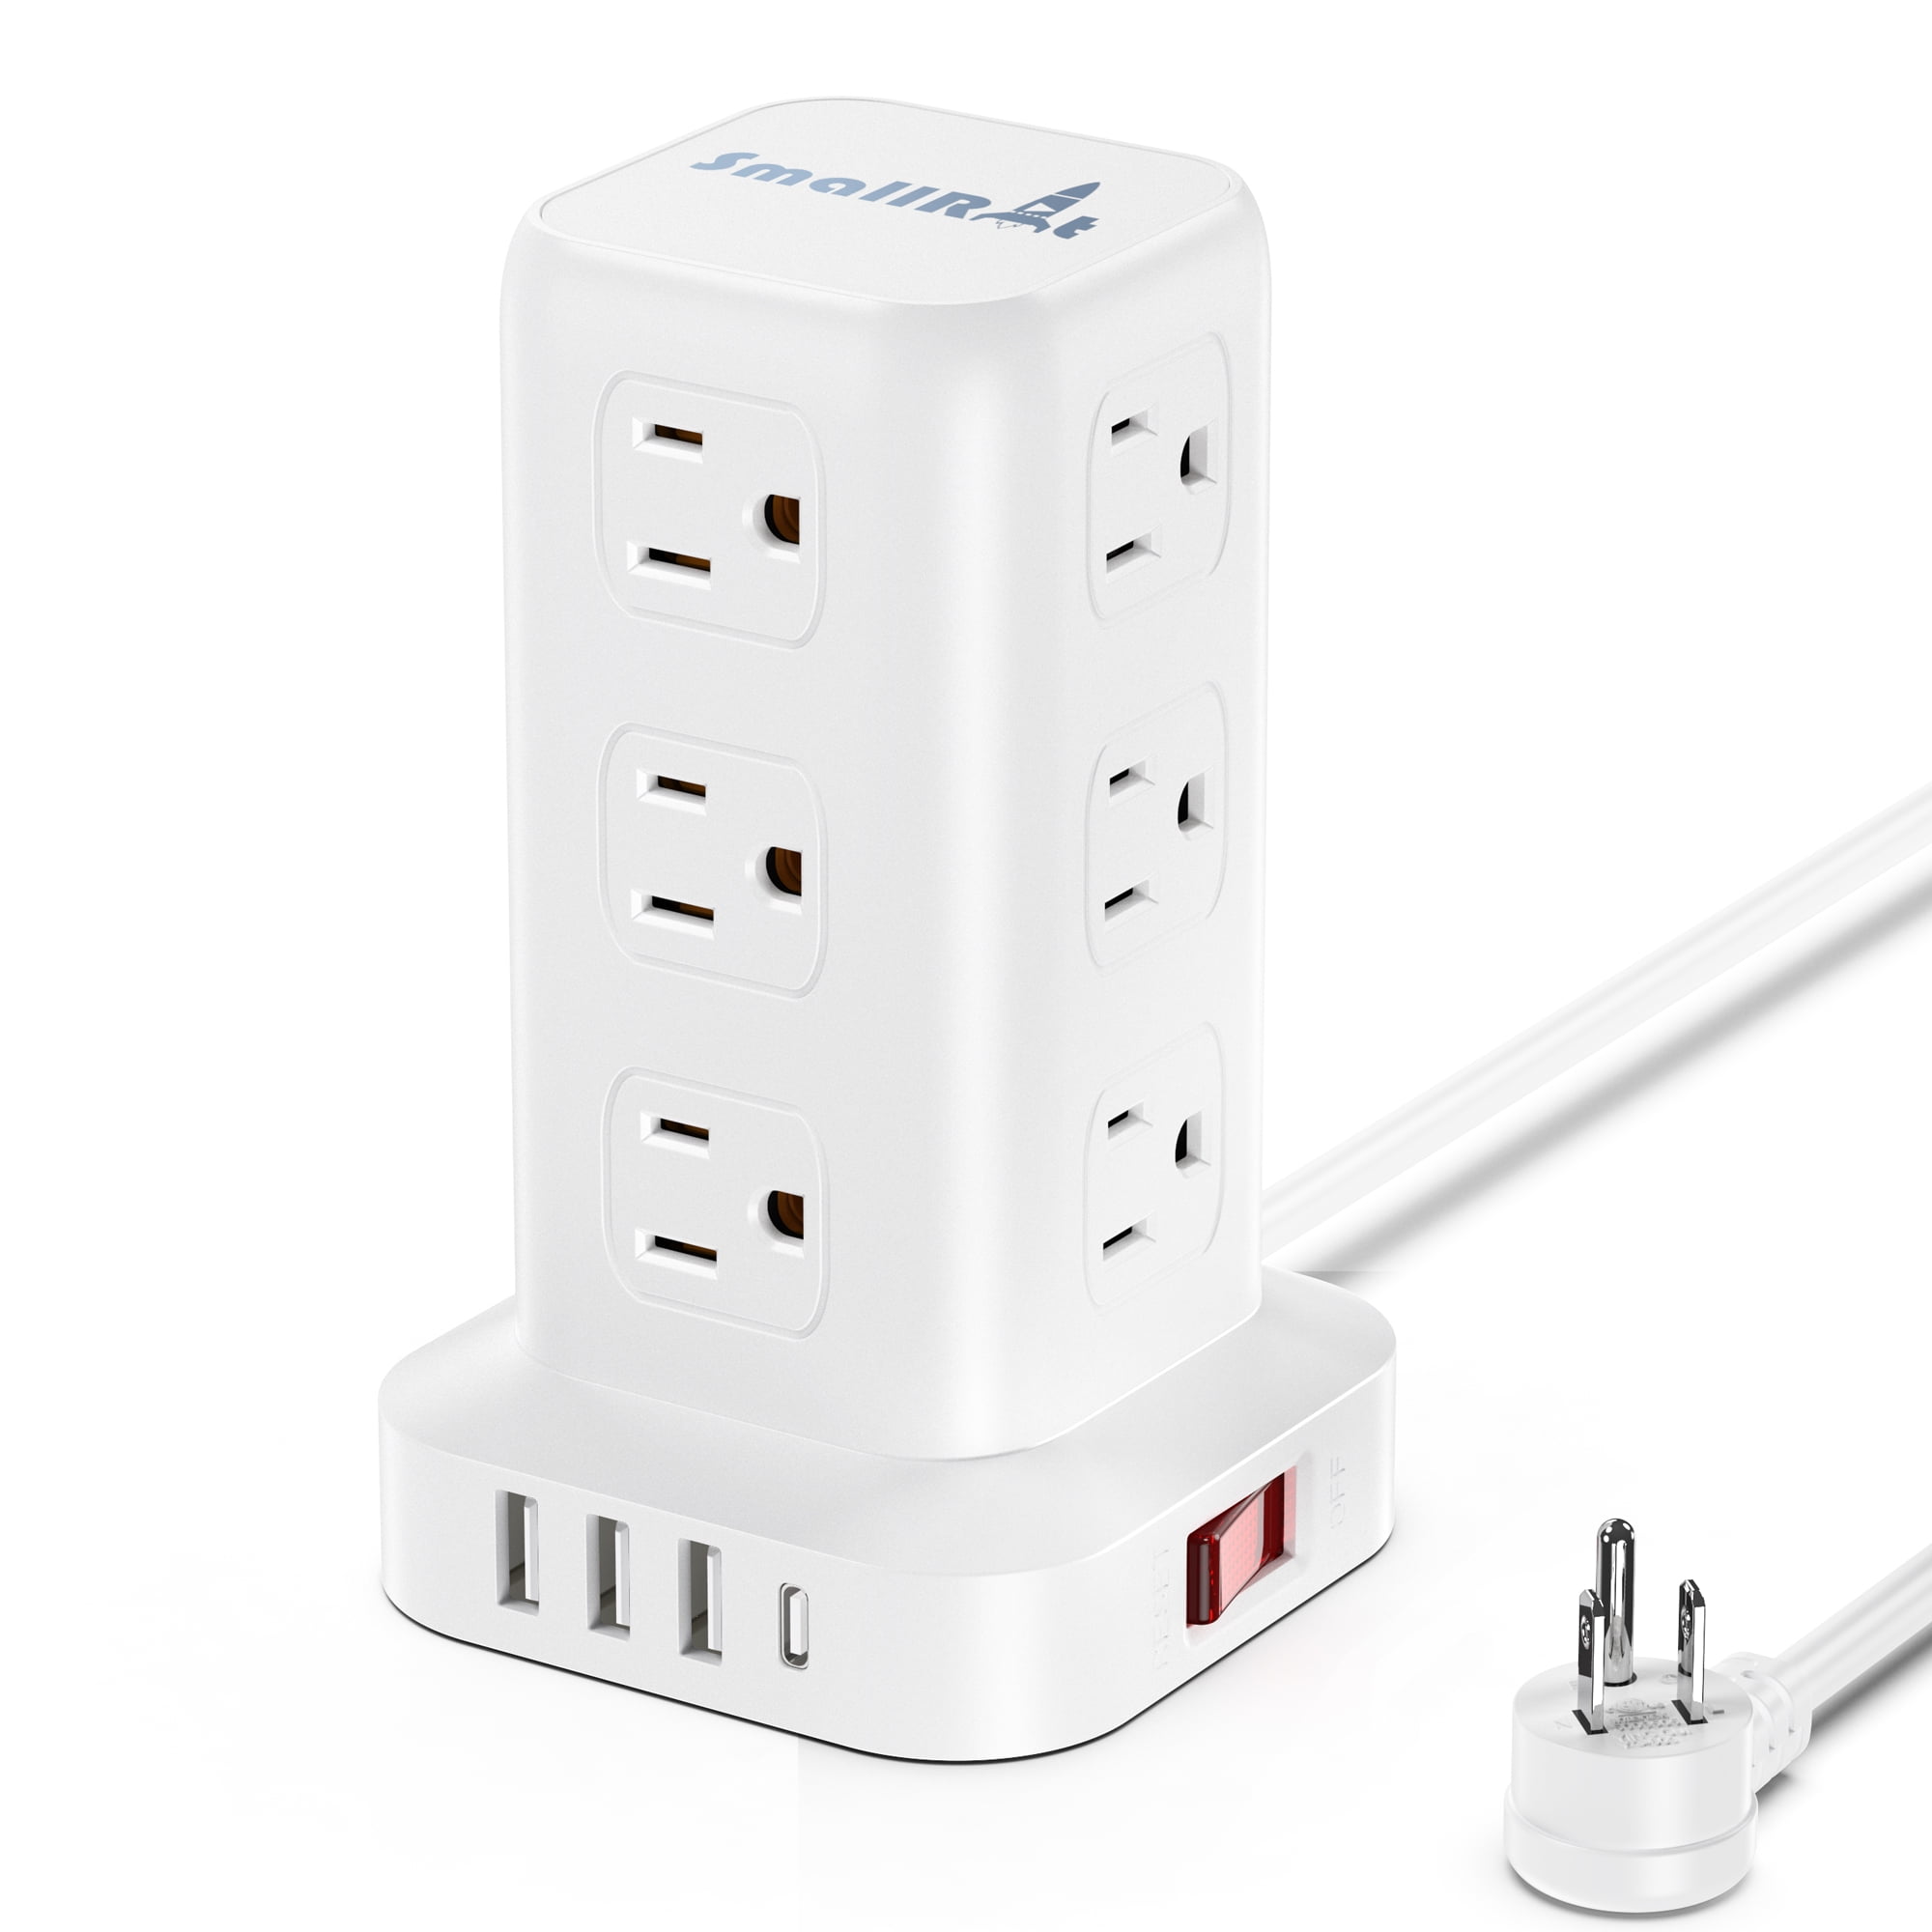 bekendtskab vrede pilfer Power Strip Tower 12 Outlets with 4 USB Ports Surge Protector Electric  Charging Station 6.5ft Cord, White - Walmart.com